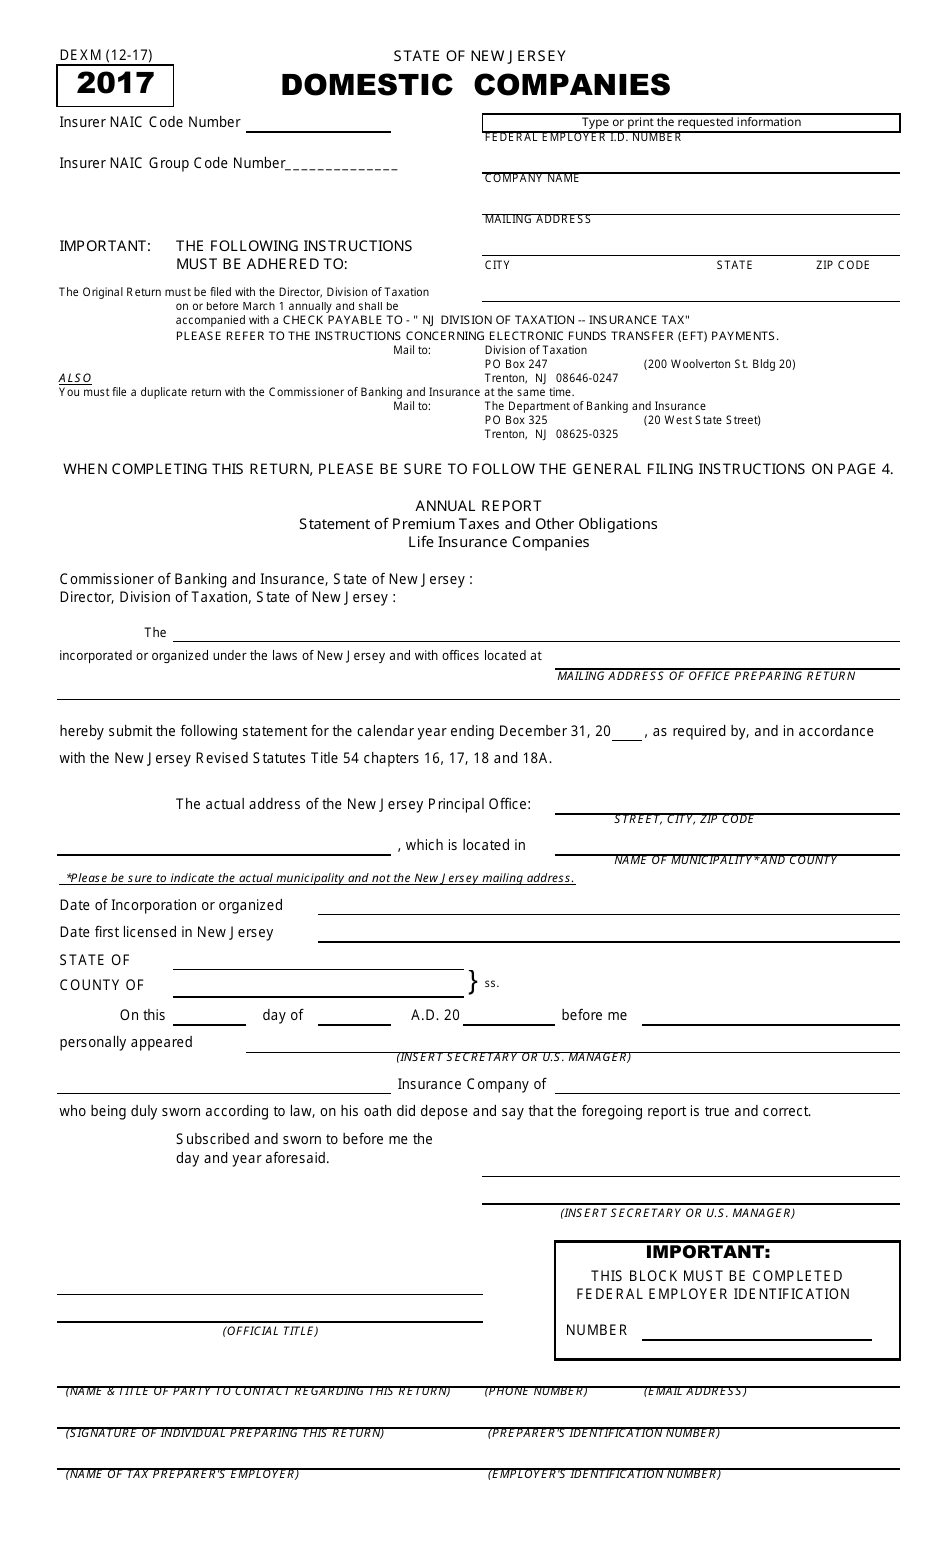 Form DEXM Domestic Companies - New Jersey, Page 1